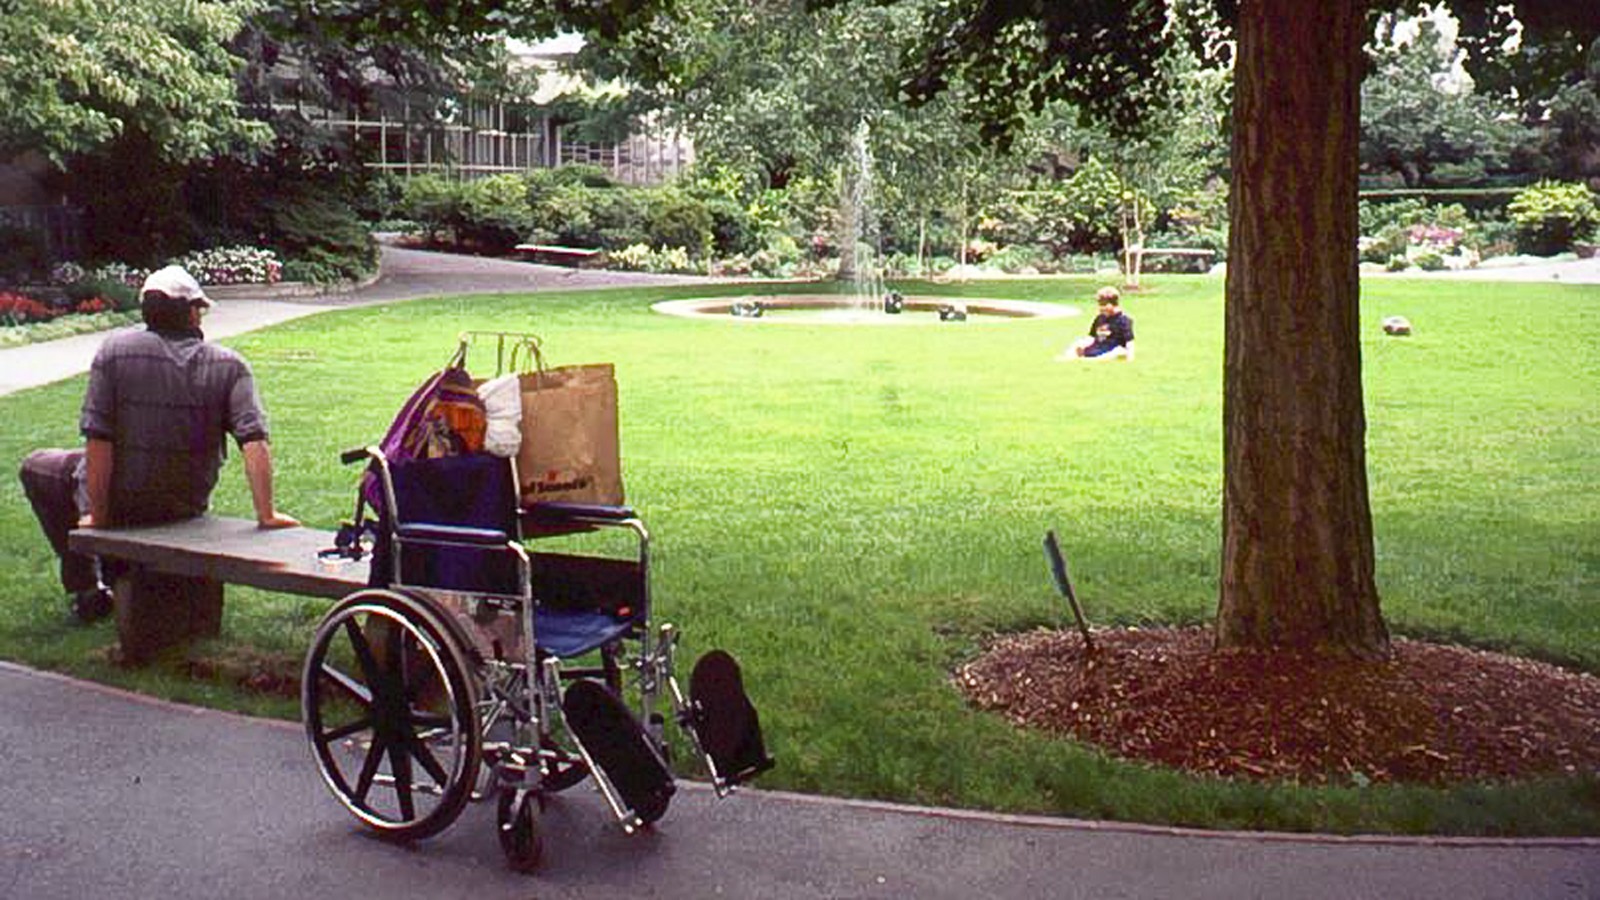 The Prouty Garden at Boston Children's Hospital